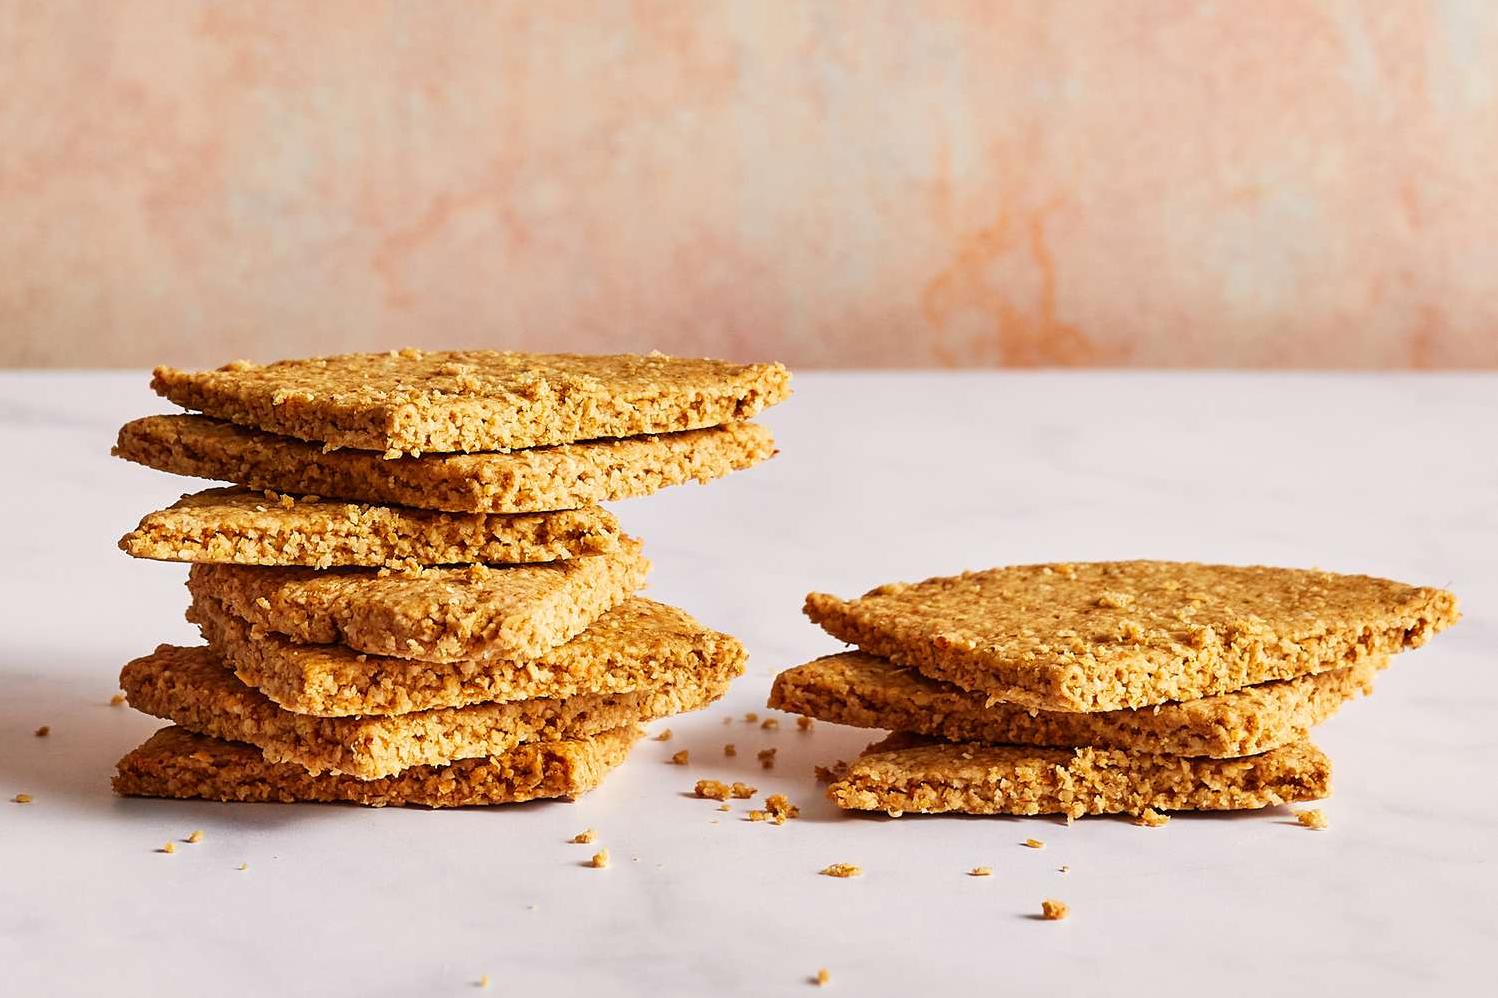  Give in to your carb cravings with these wholesome oatcakes